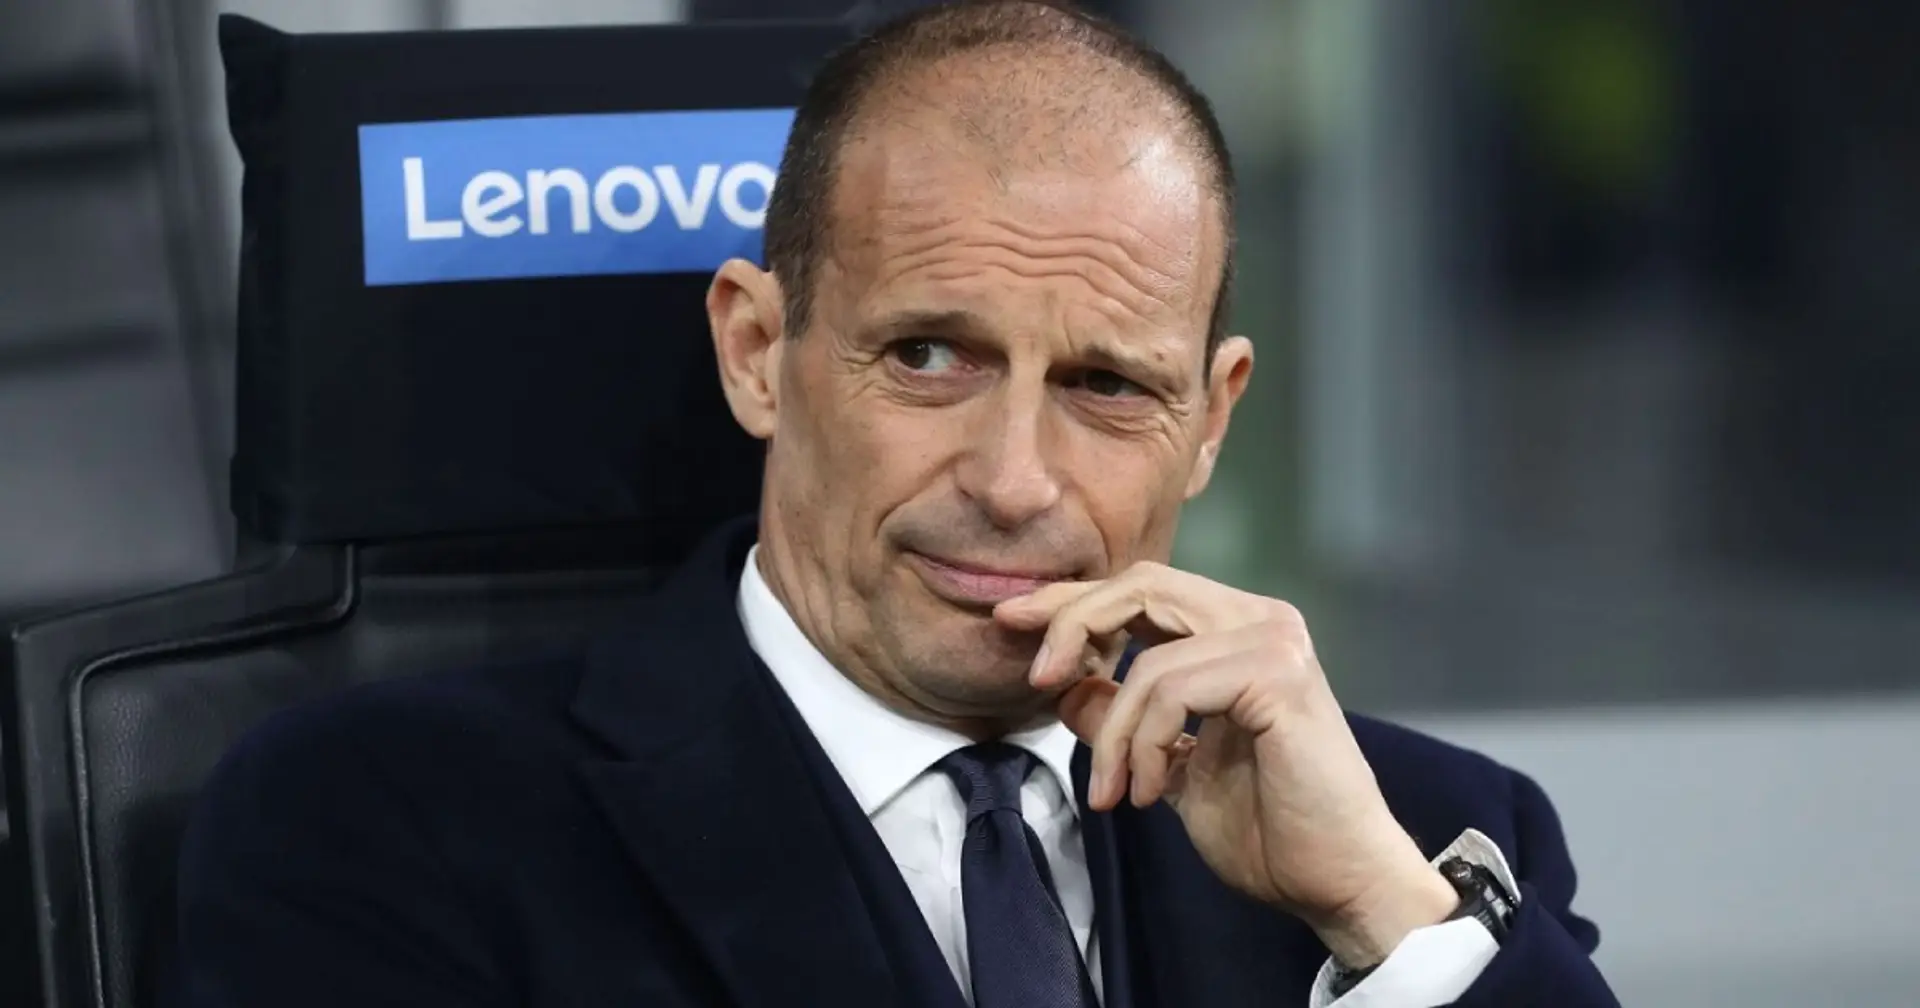 Chelsea linked with Allegri as potential Pochettino replacement & 2 more under-radar stories